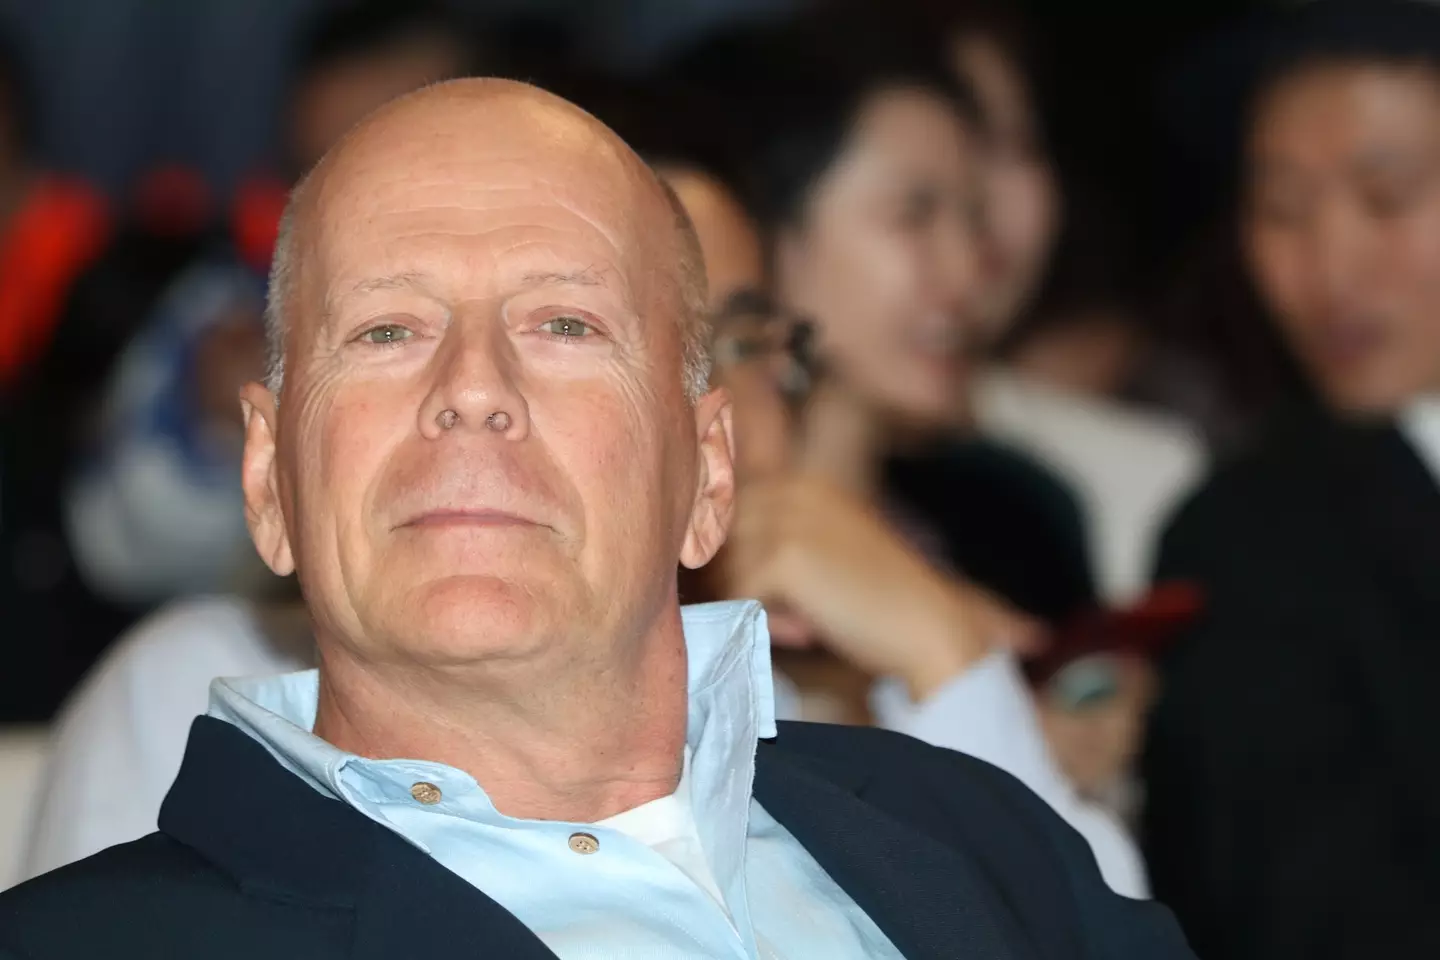 Bruce Willis was diagnosed with a rare form of dementia.